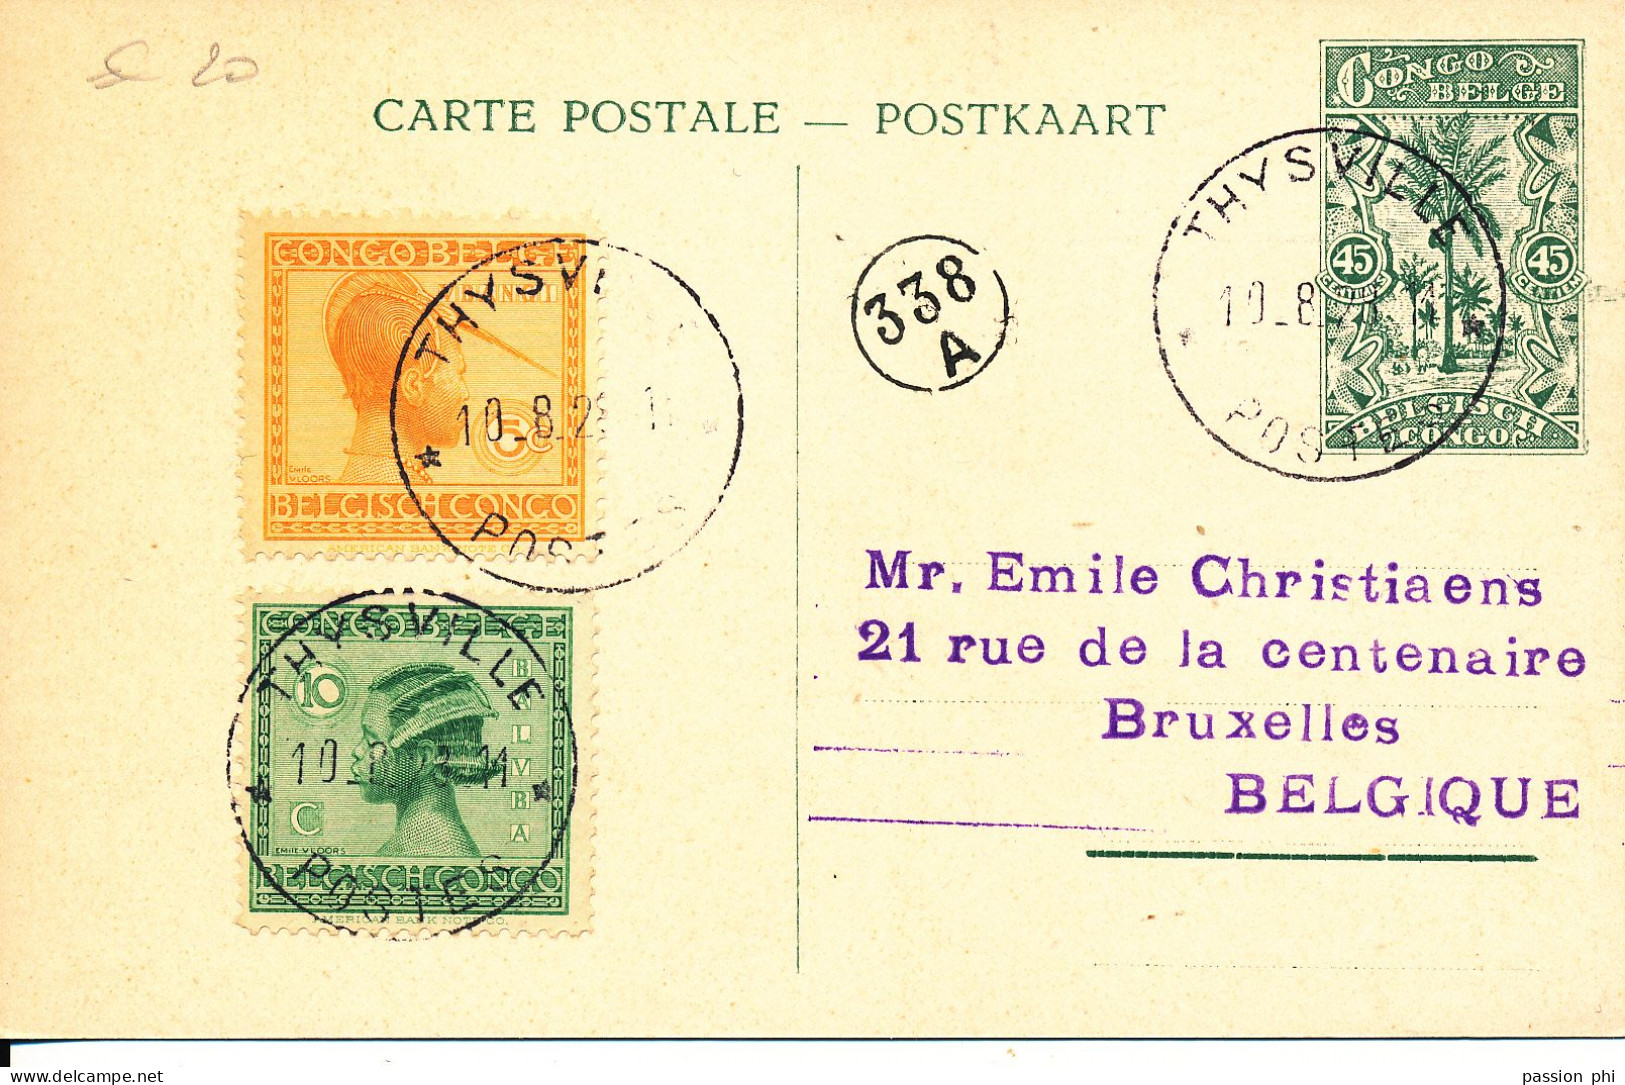 BELGIAN CONGO 1912 ISSUE PPS SBEP 66a VIEW 6 USED - Interi Postali